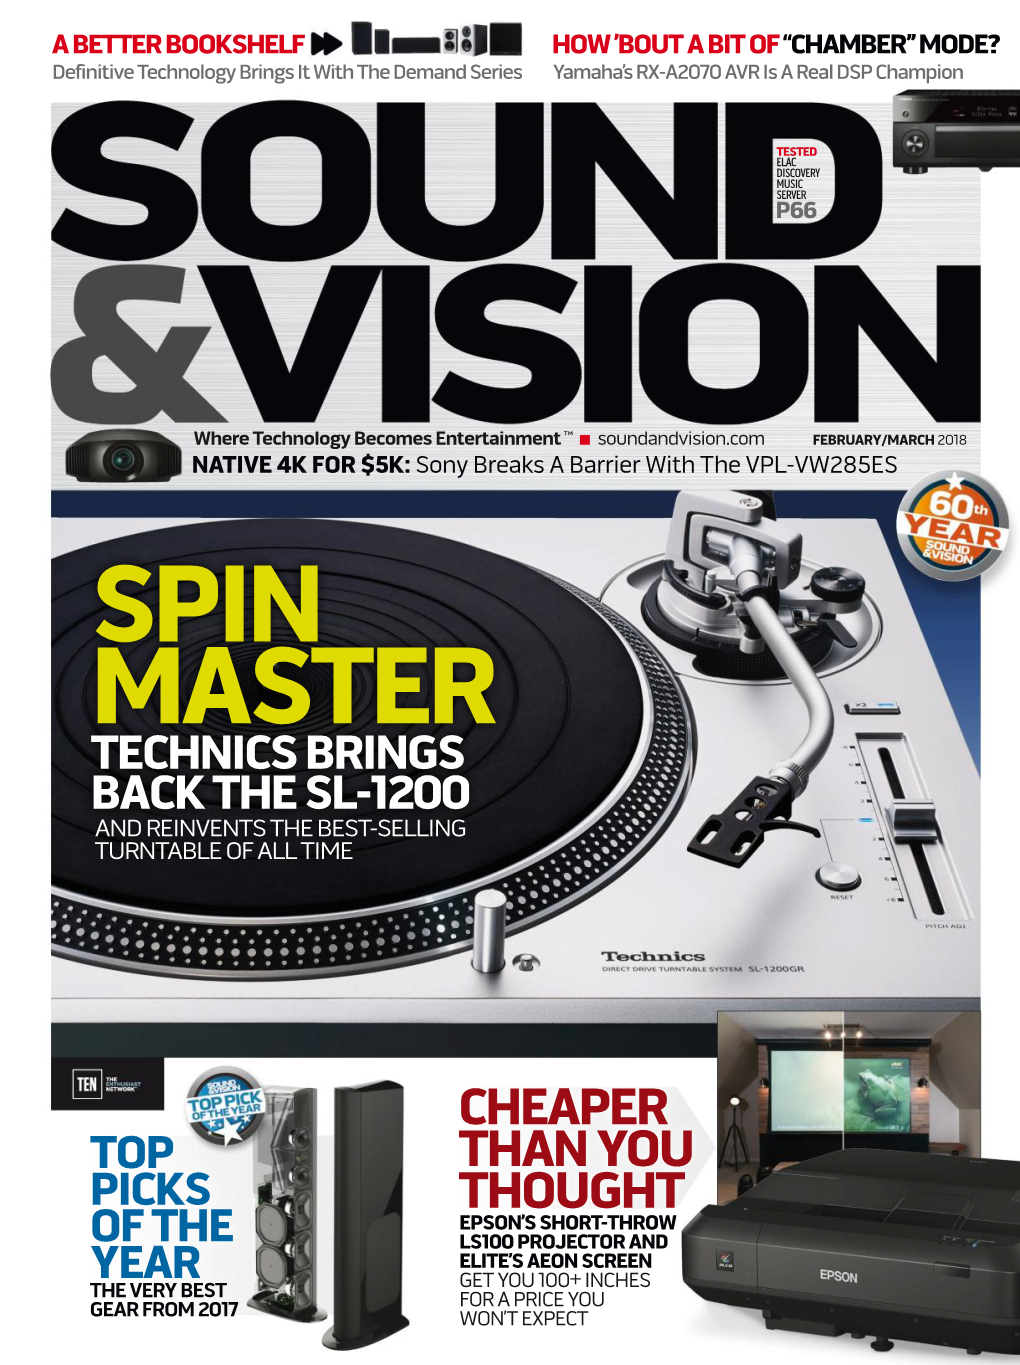 Spin Master Technics Brings Back the Sl-1200 and Reinvents the Best-Selling Turntable of All Time